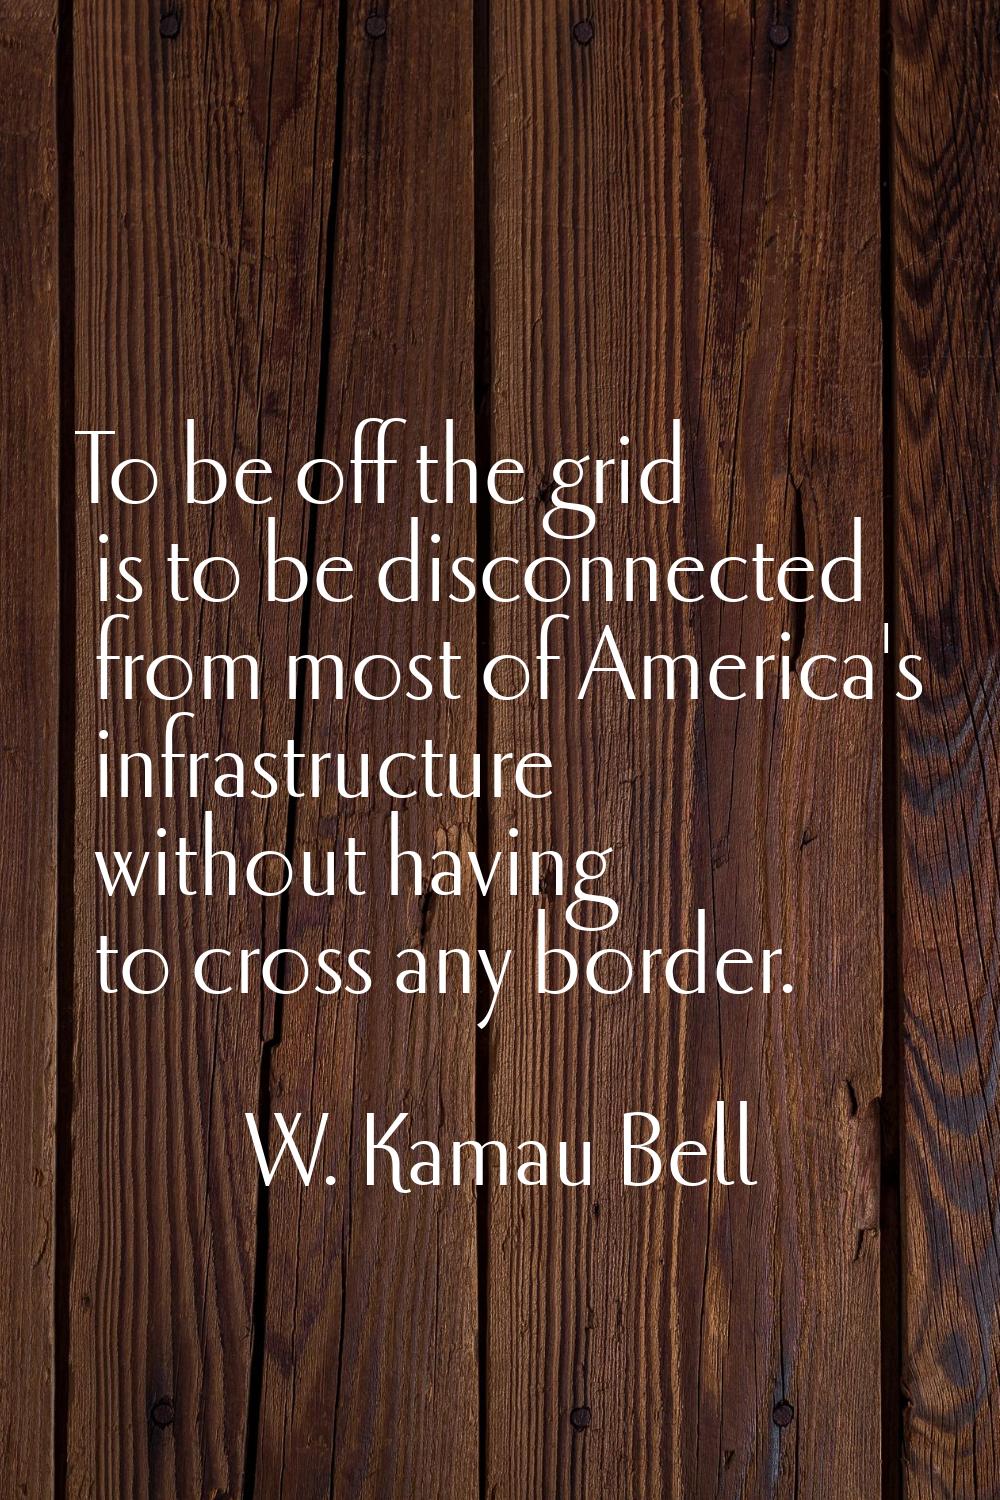 To be off the grid is to be disconnected from most of America's infrastructure without having to cr